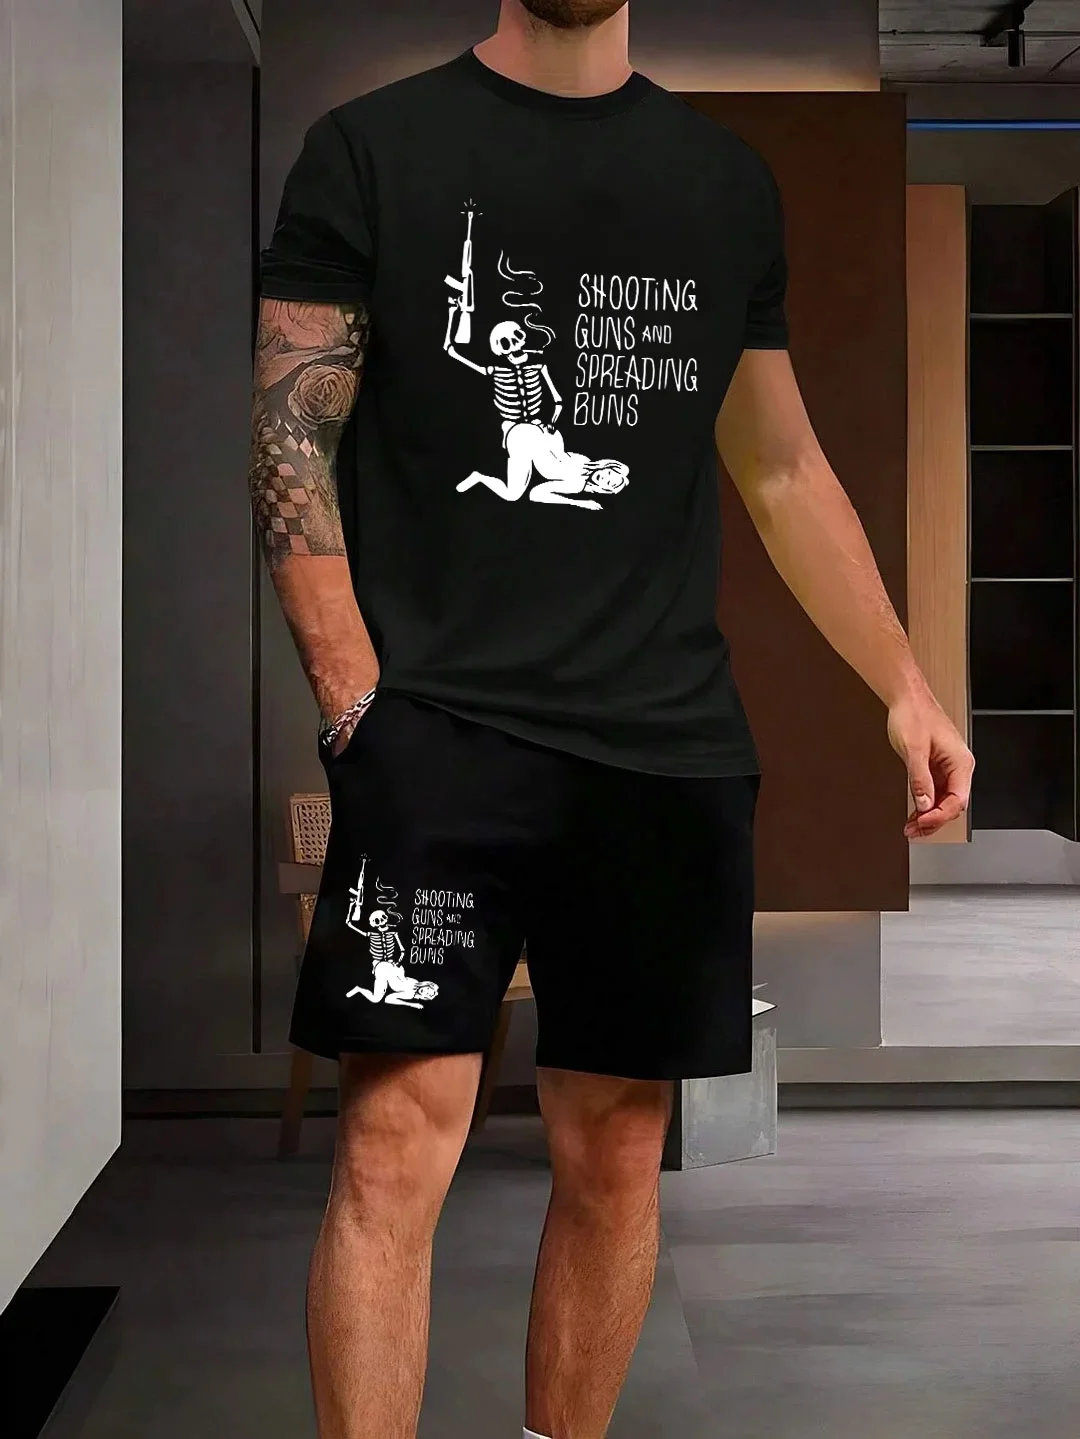 SHOOTING GUNS AND SPREADING BUNS Black T-shirt and Shorts Printed Suit